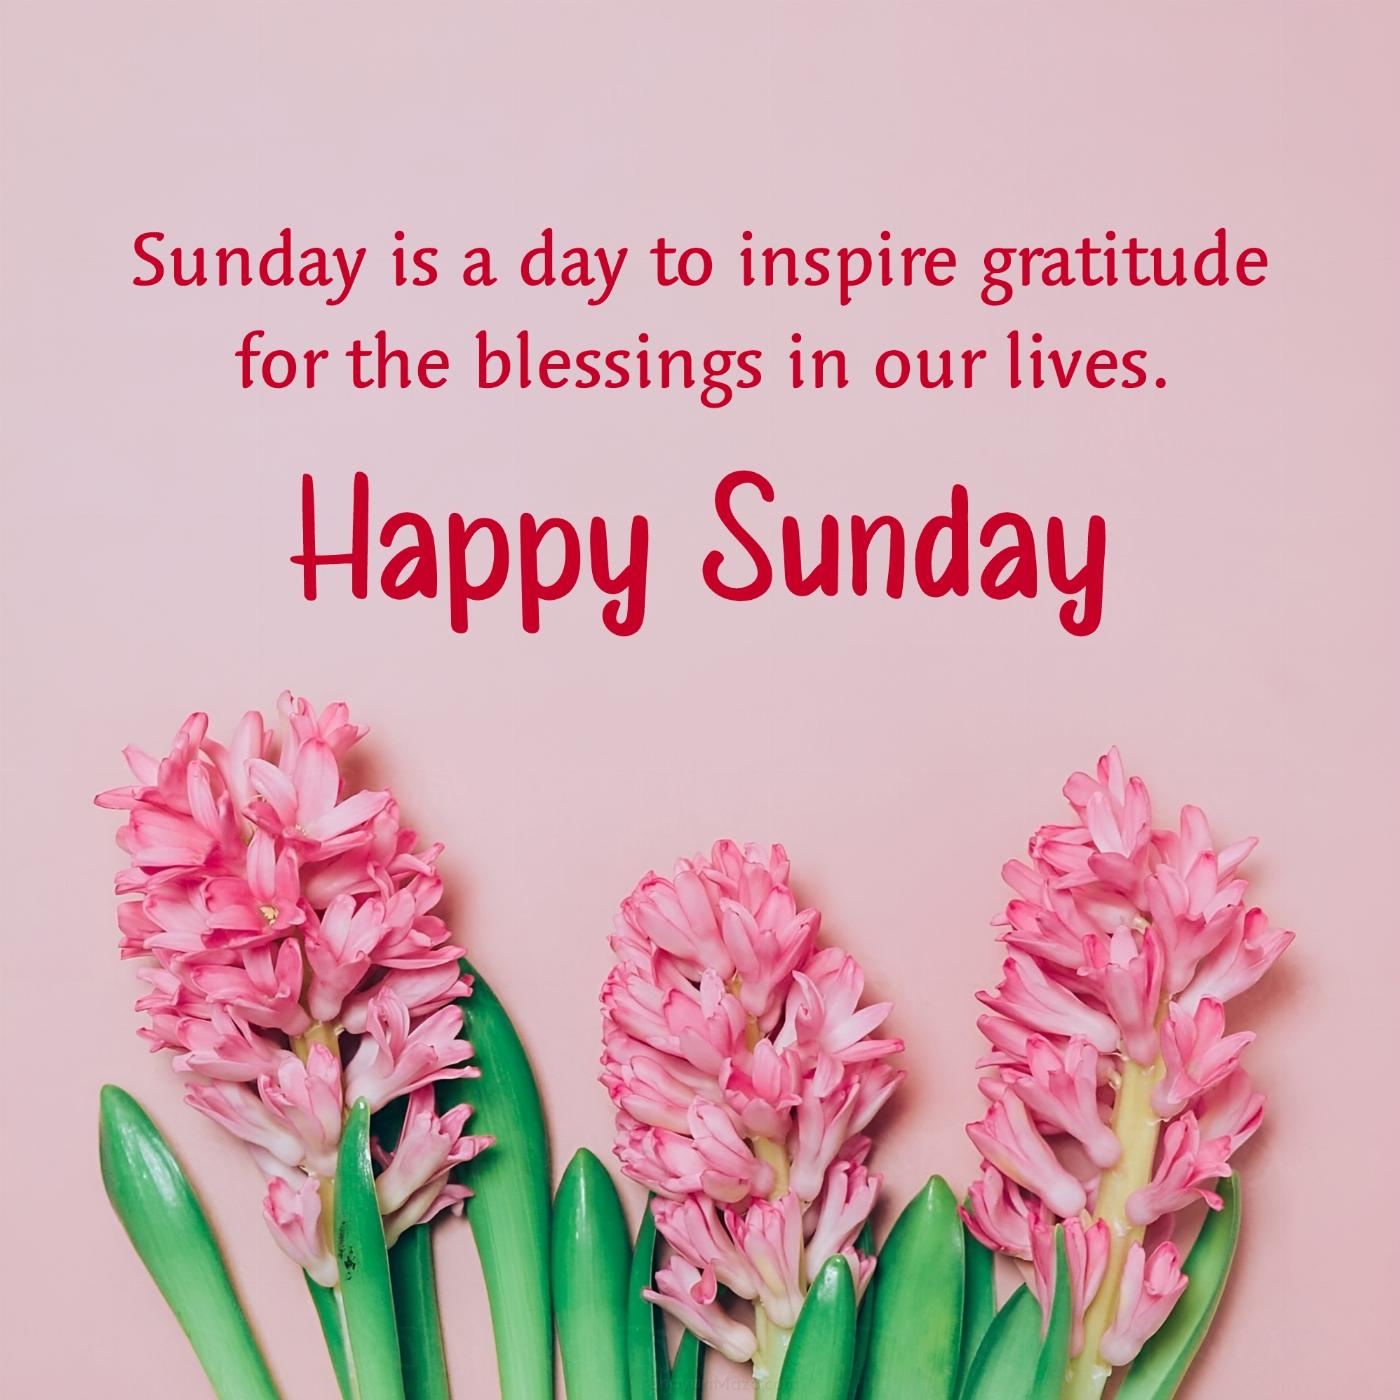 Sunday is a day to inspire gratitude for the blessings in our lives